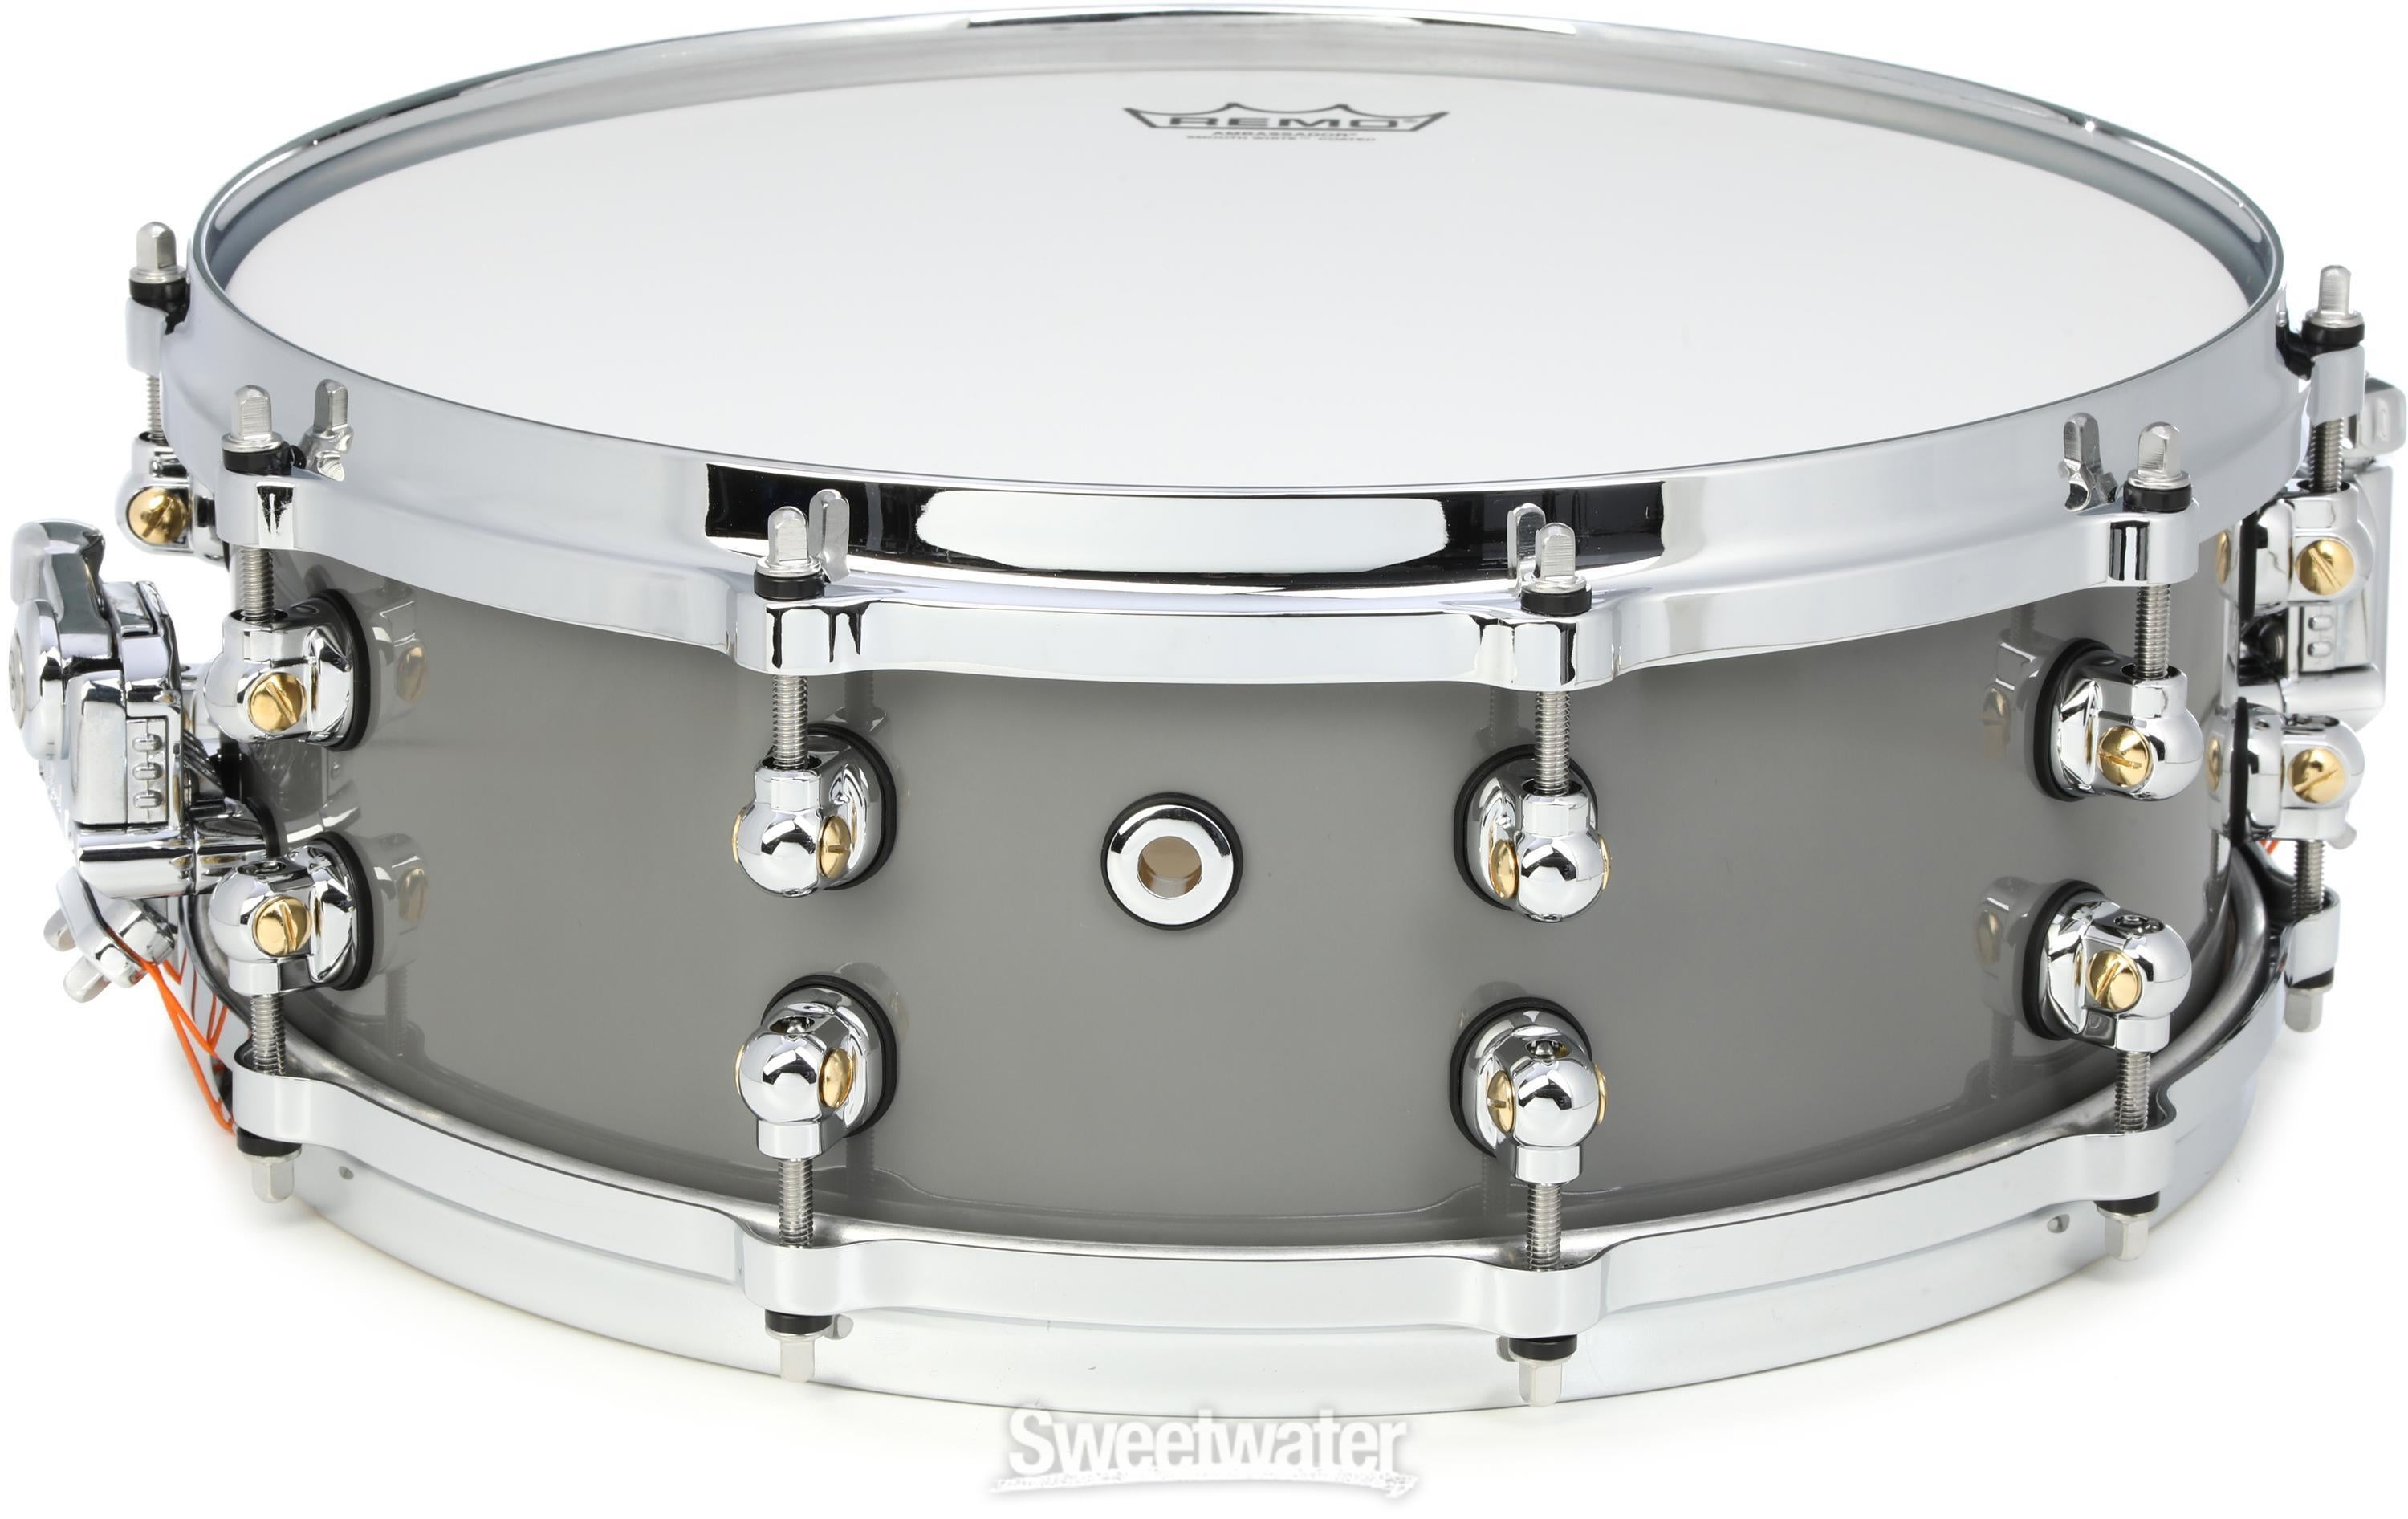 Reference One Snare Drum - 5 x 14 inch - Putty Gray - Sweetwater